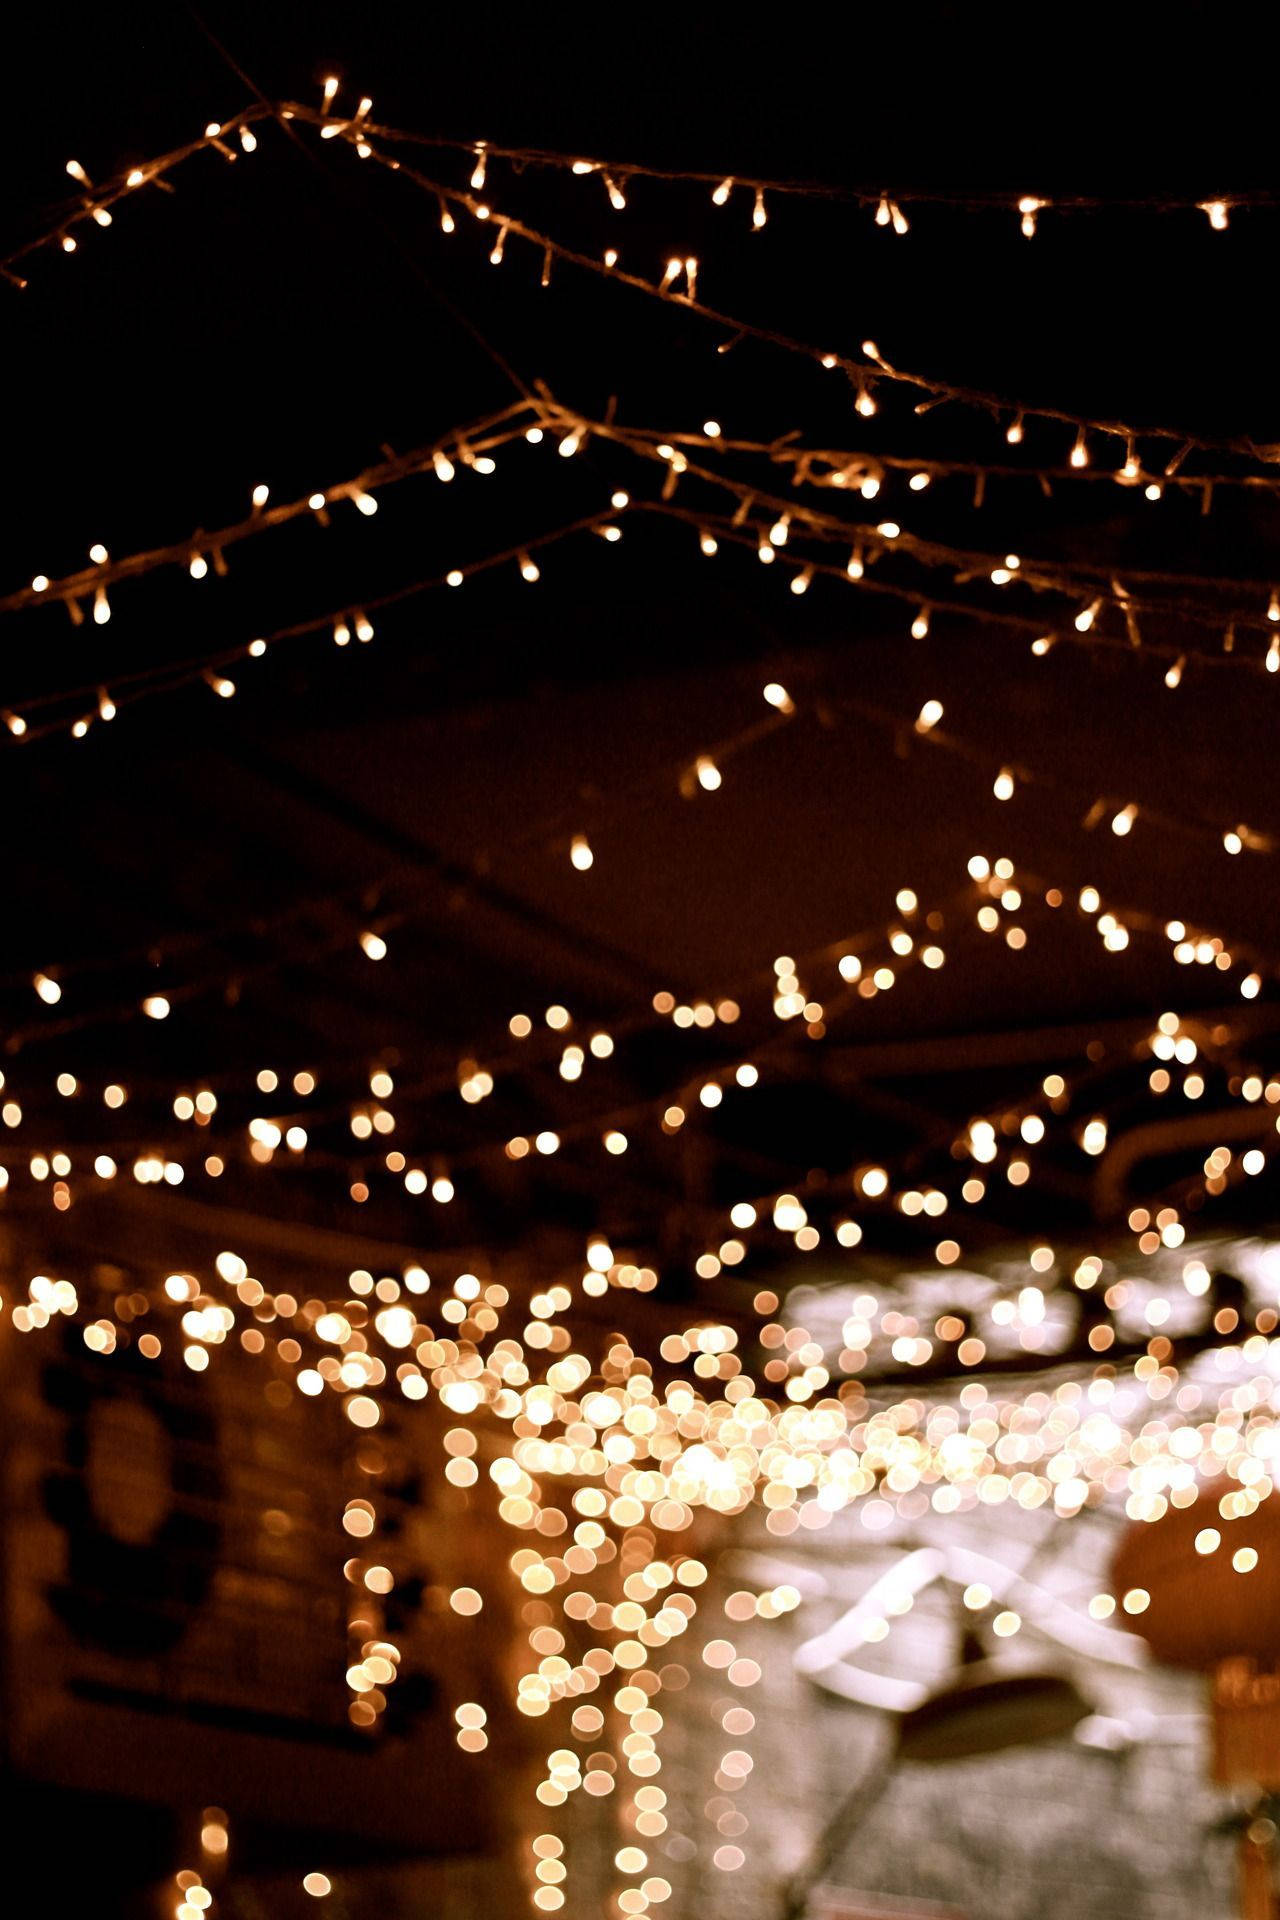 Let the Christmas lights lighten up your nights! Wallpaper